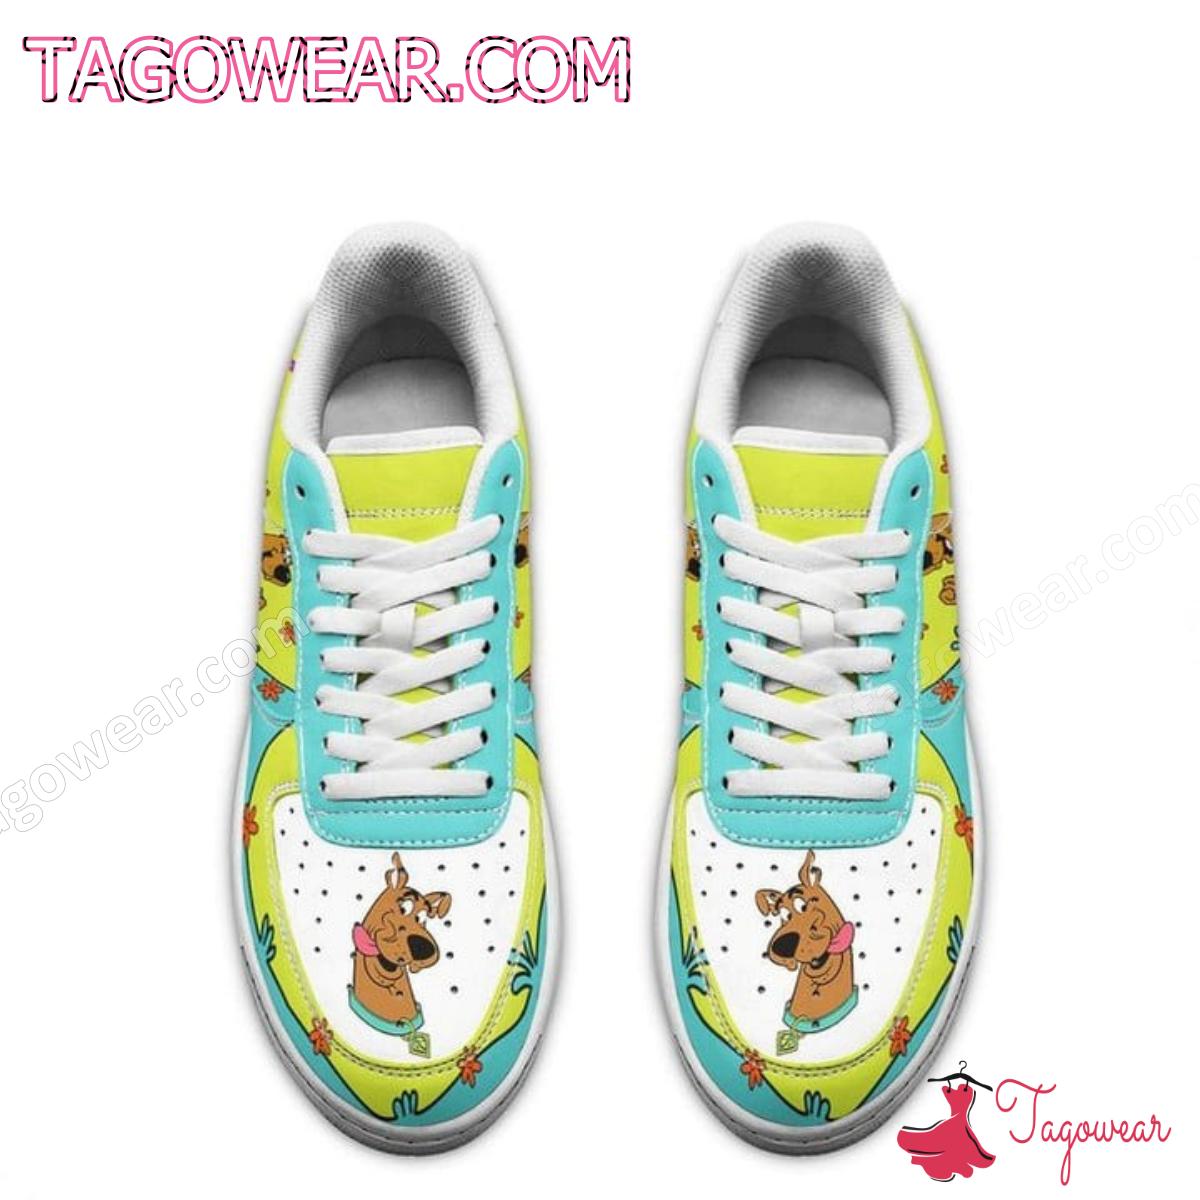 Scooby-doo Cartoon Air Force Shoes a